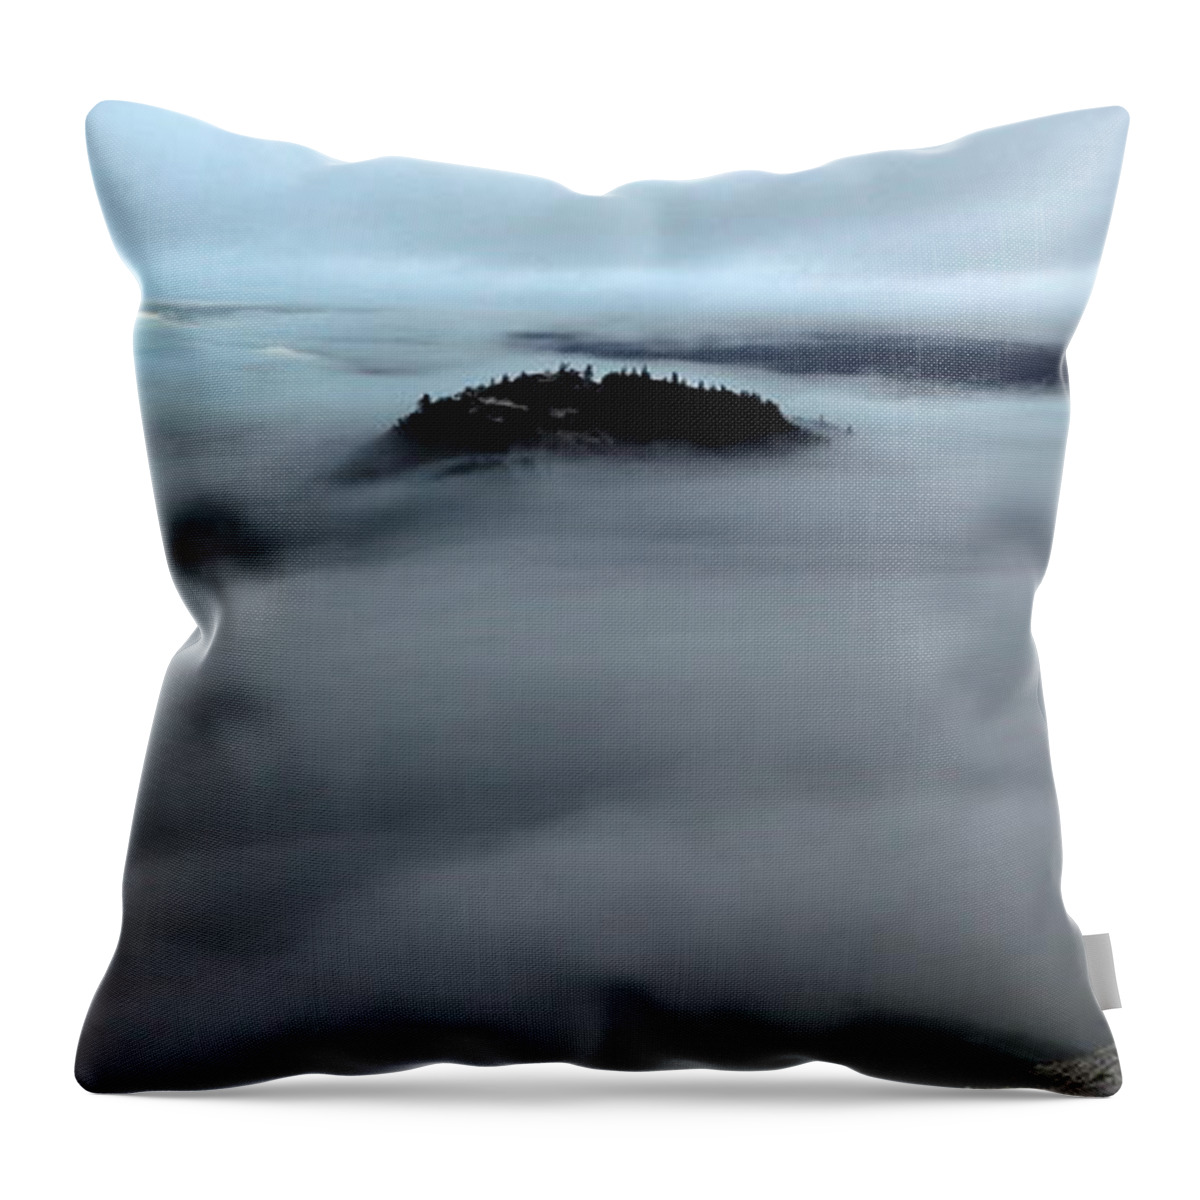 Nature Throw Pillow featuring the photograph Misty Landscape by Lukasz Ryszka